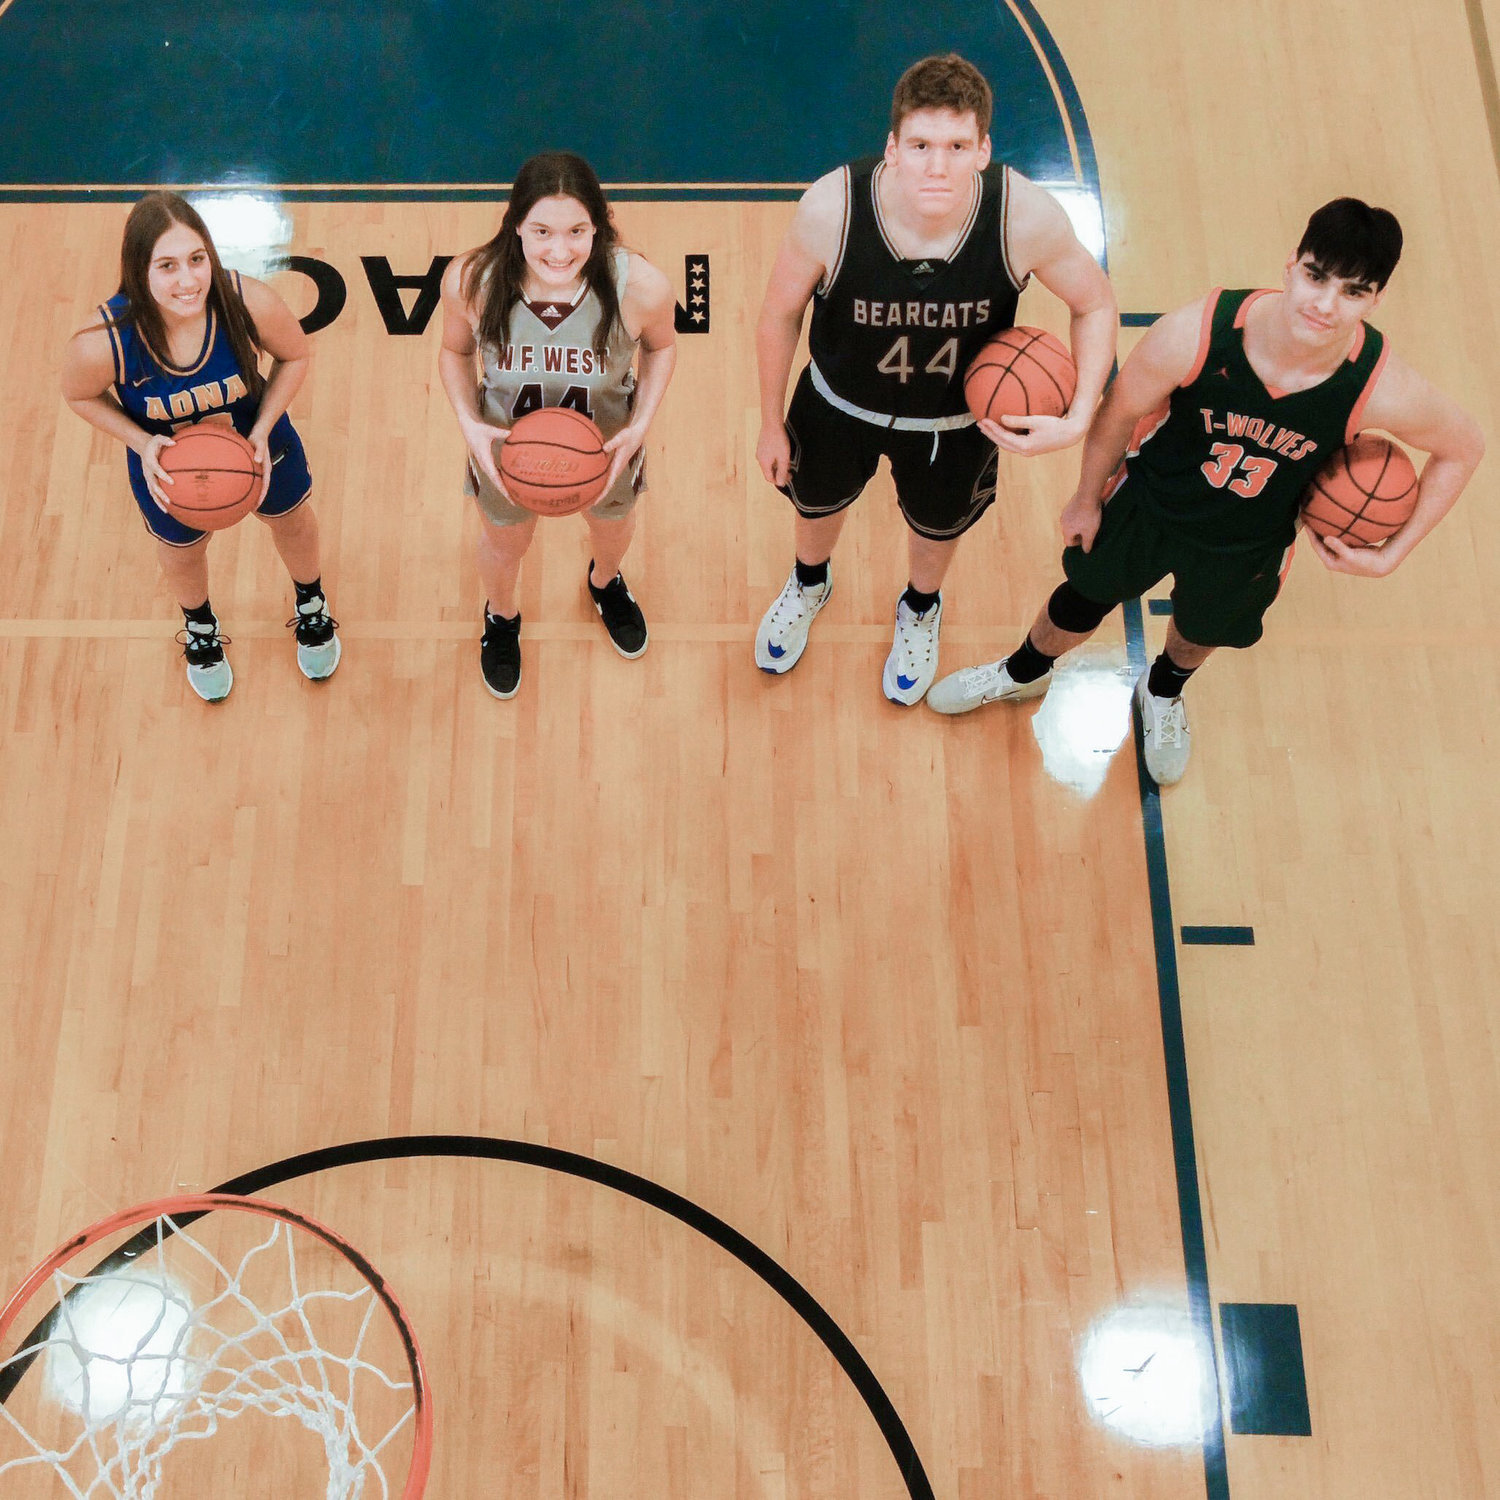 From left, Adna’s Karlee VonMoos, W.F. West’s Julia and Soren Dalan, and MWP’s Josh Salguero hold basketballs and pose for a photo in the Centralia College gymnasium on Tuesday.